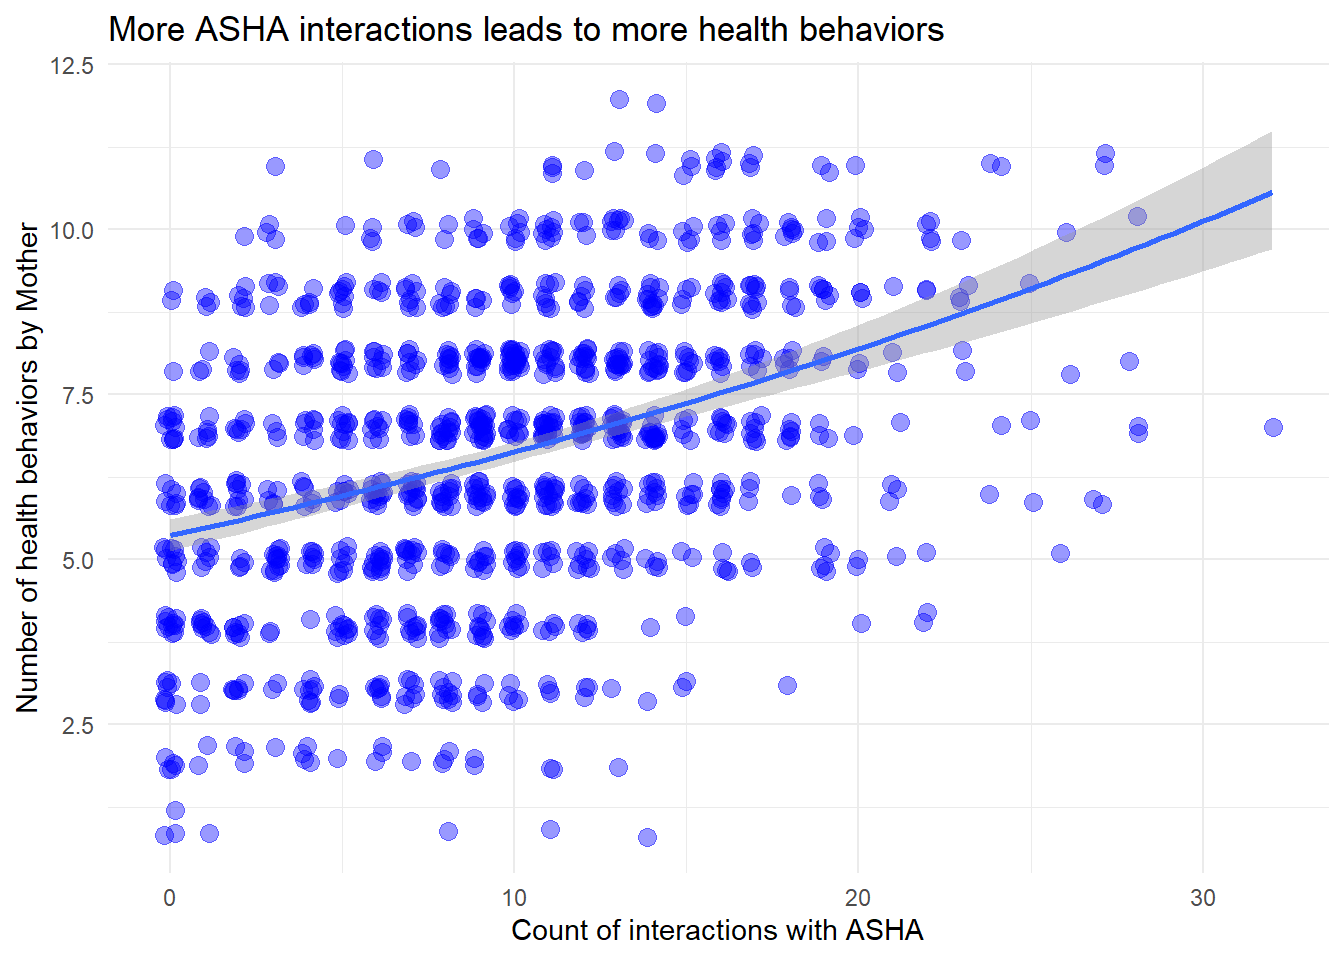 The relationship between mother health score and ASHA interaction score.